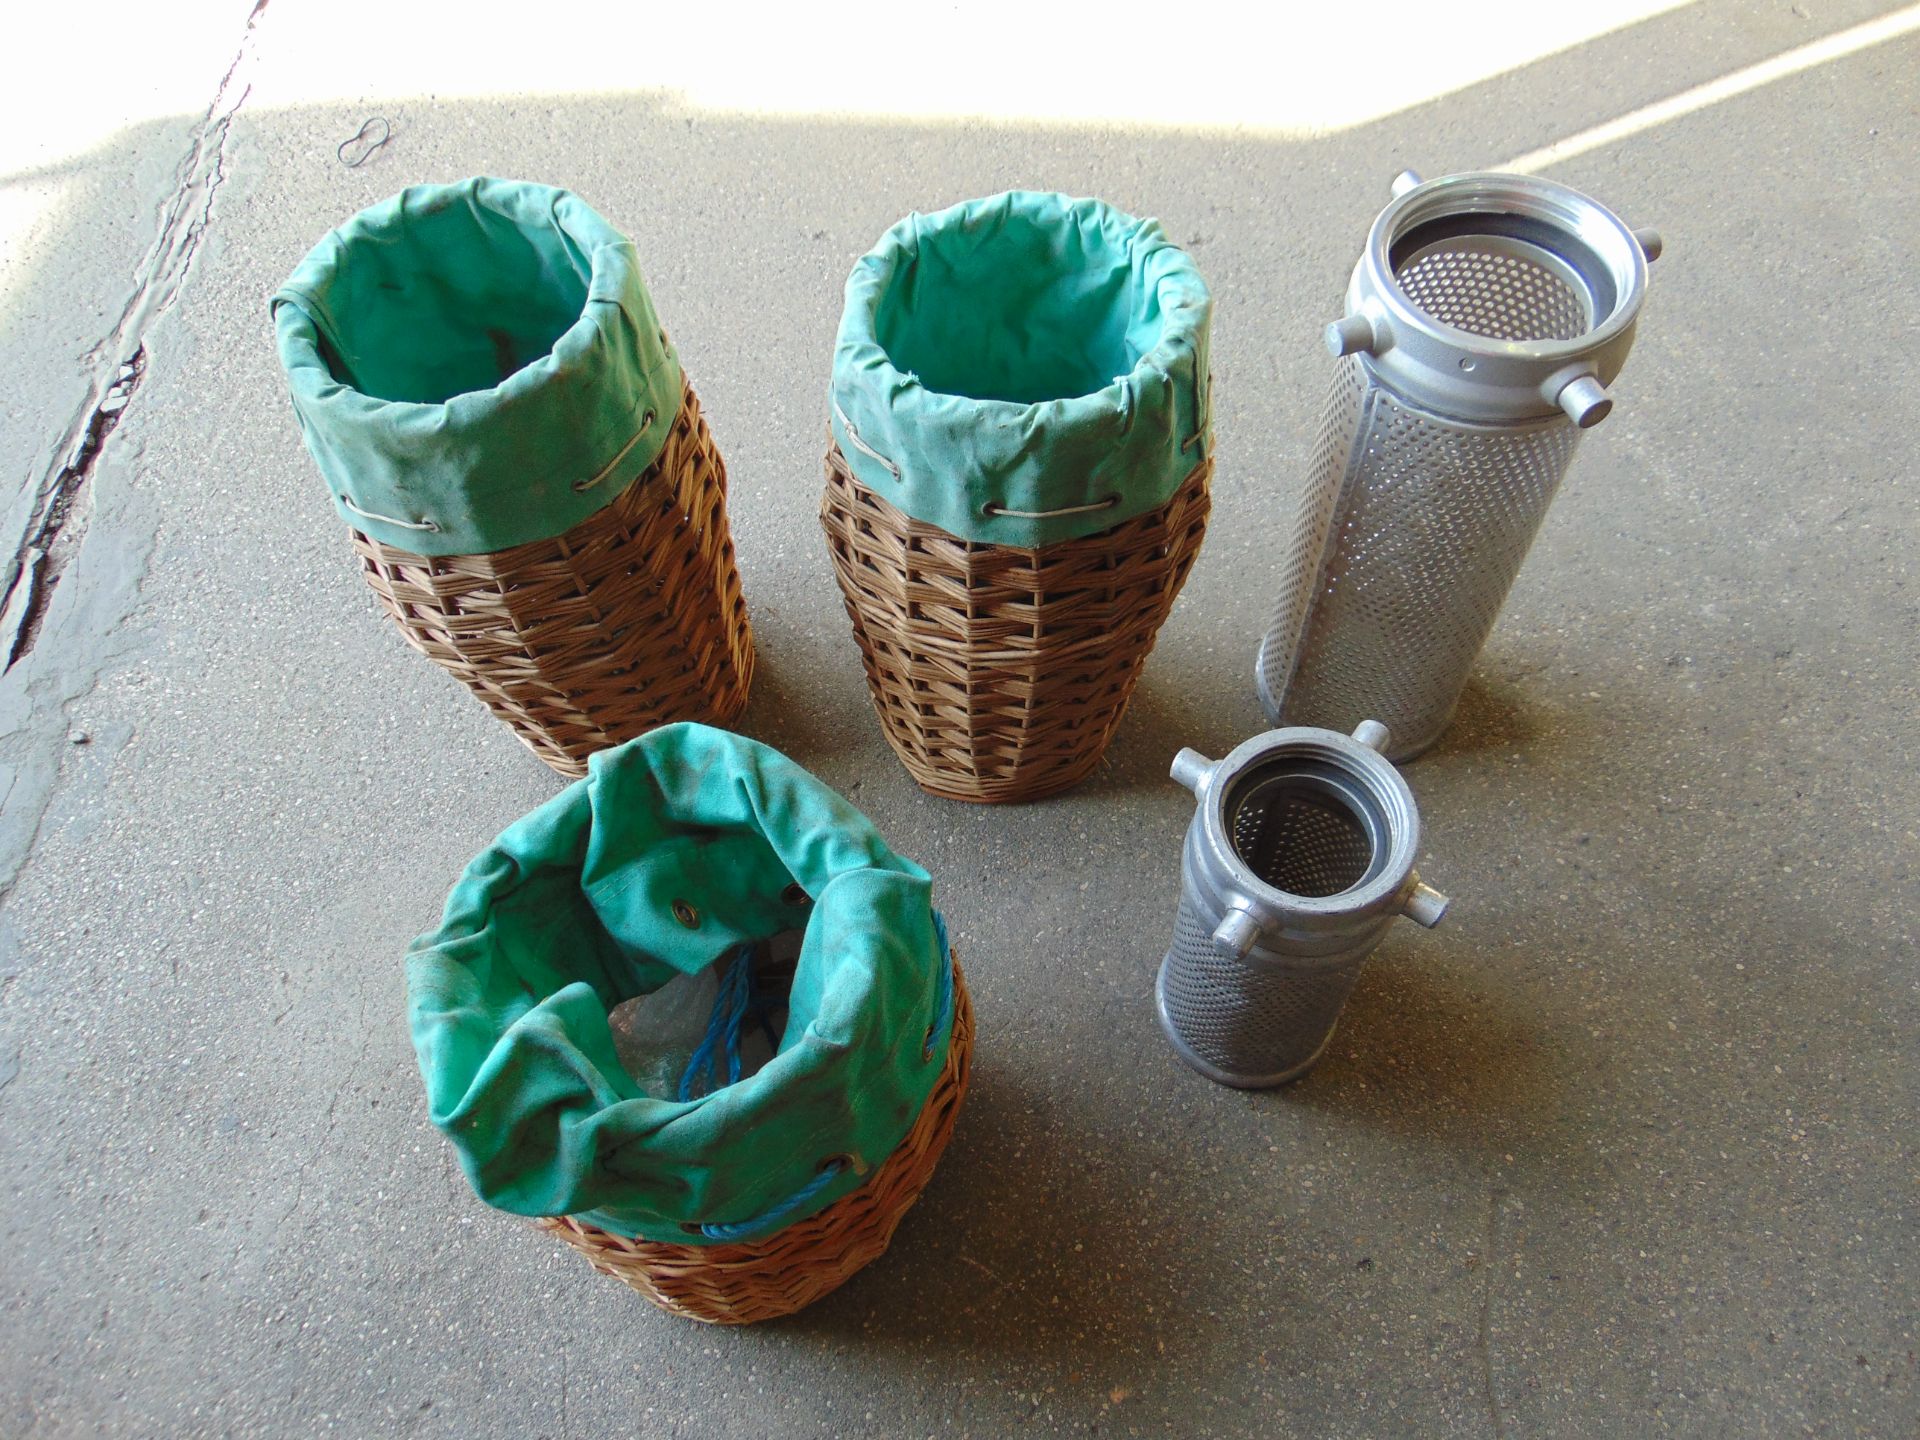 2 x Strainers & 3 x Strainer Baskets - Image 2 of 8